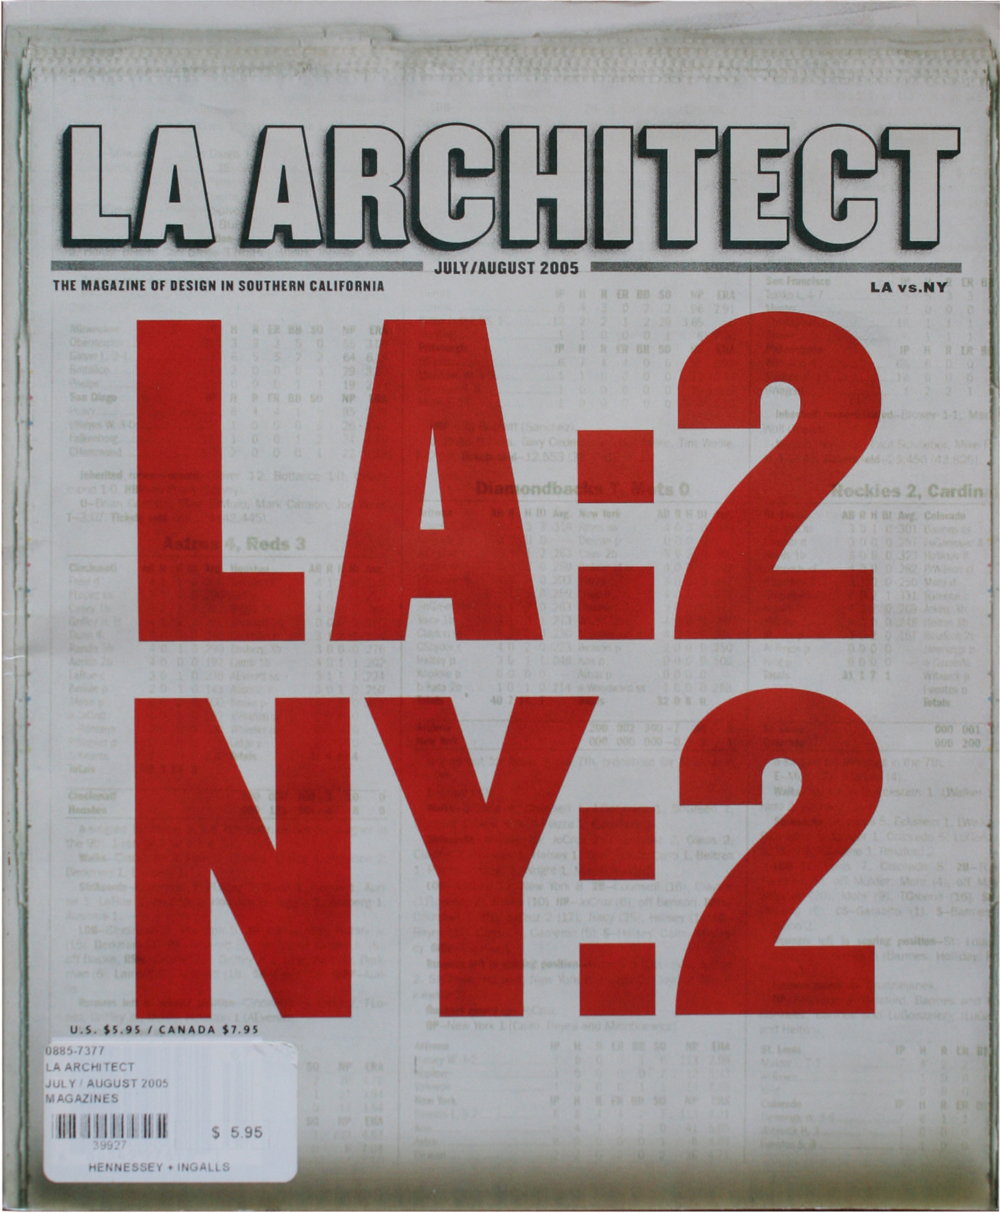 LA Architect, July/August 2005, On ‘site’: Approaching Architecture in NY and LA